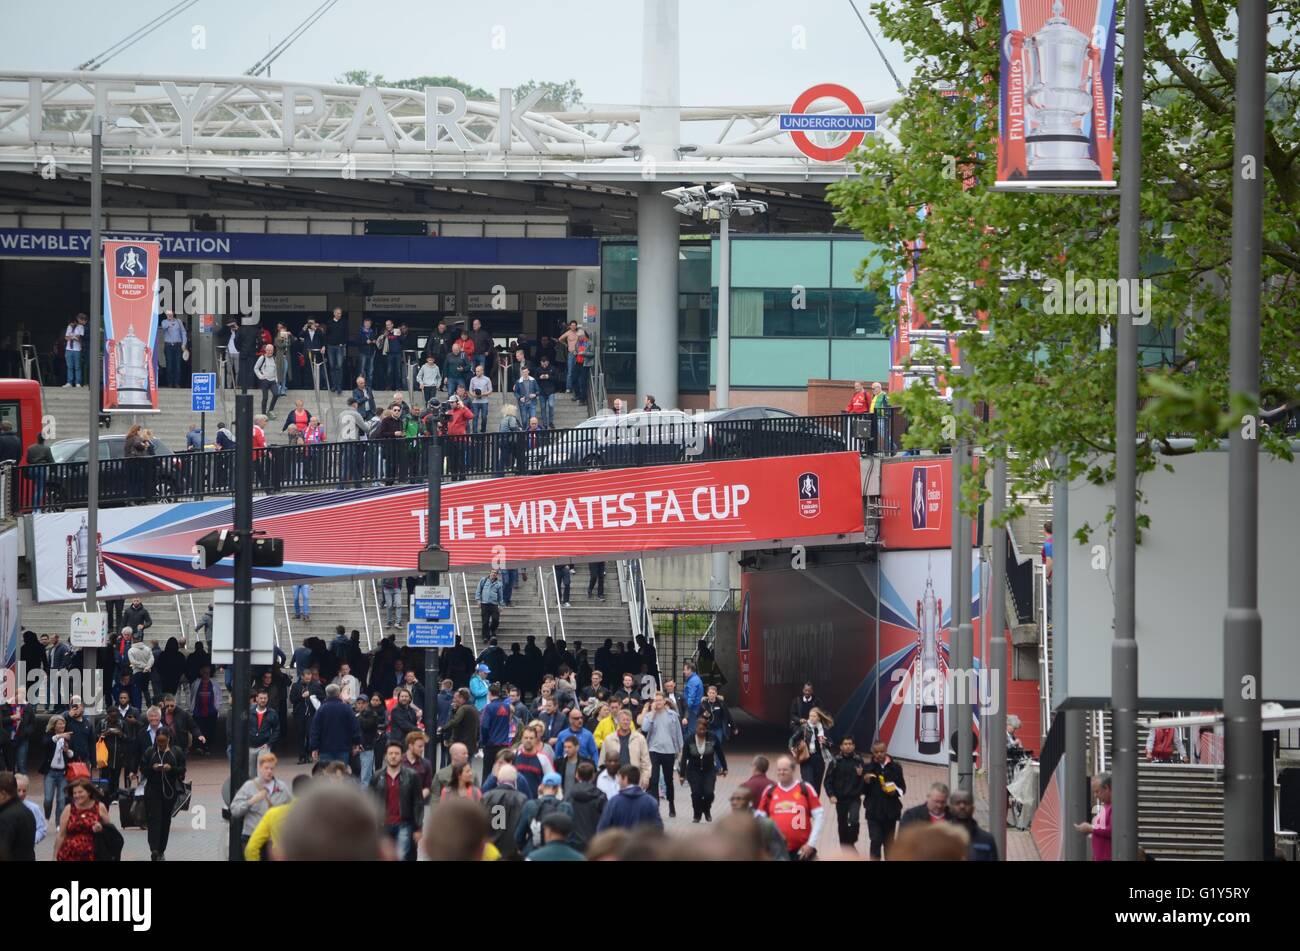 Wembley, UK. 21st May 2016. Fans arrive ahead of the anticipated FA Cup Final game between Crystal Palace and Crystal Palace. Credit: Marc Ward/Alamy Live News Stock Photo